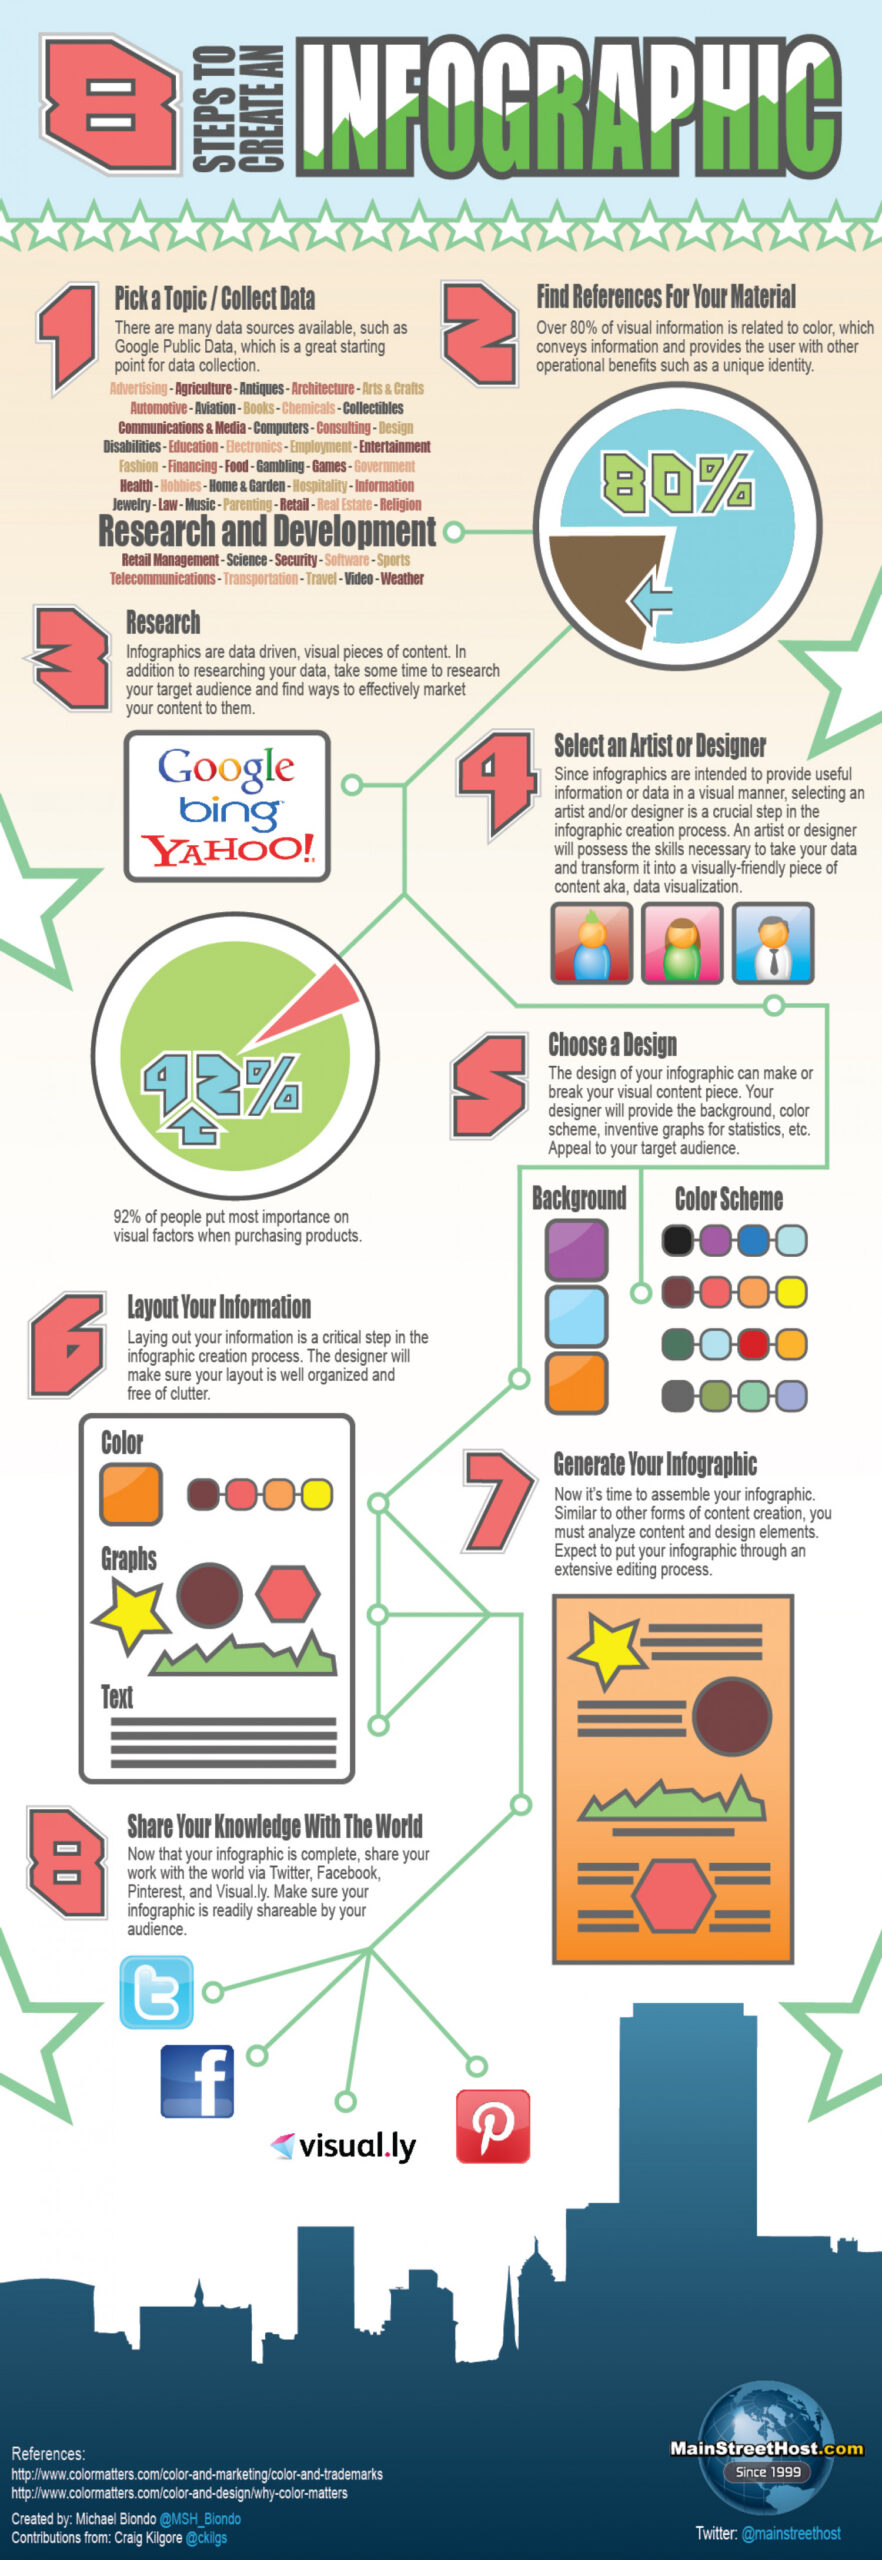 How to Create Infographics | Top Resources and How to Use Them - The vWriter Blog